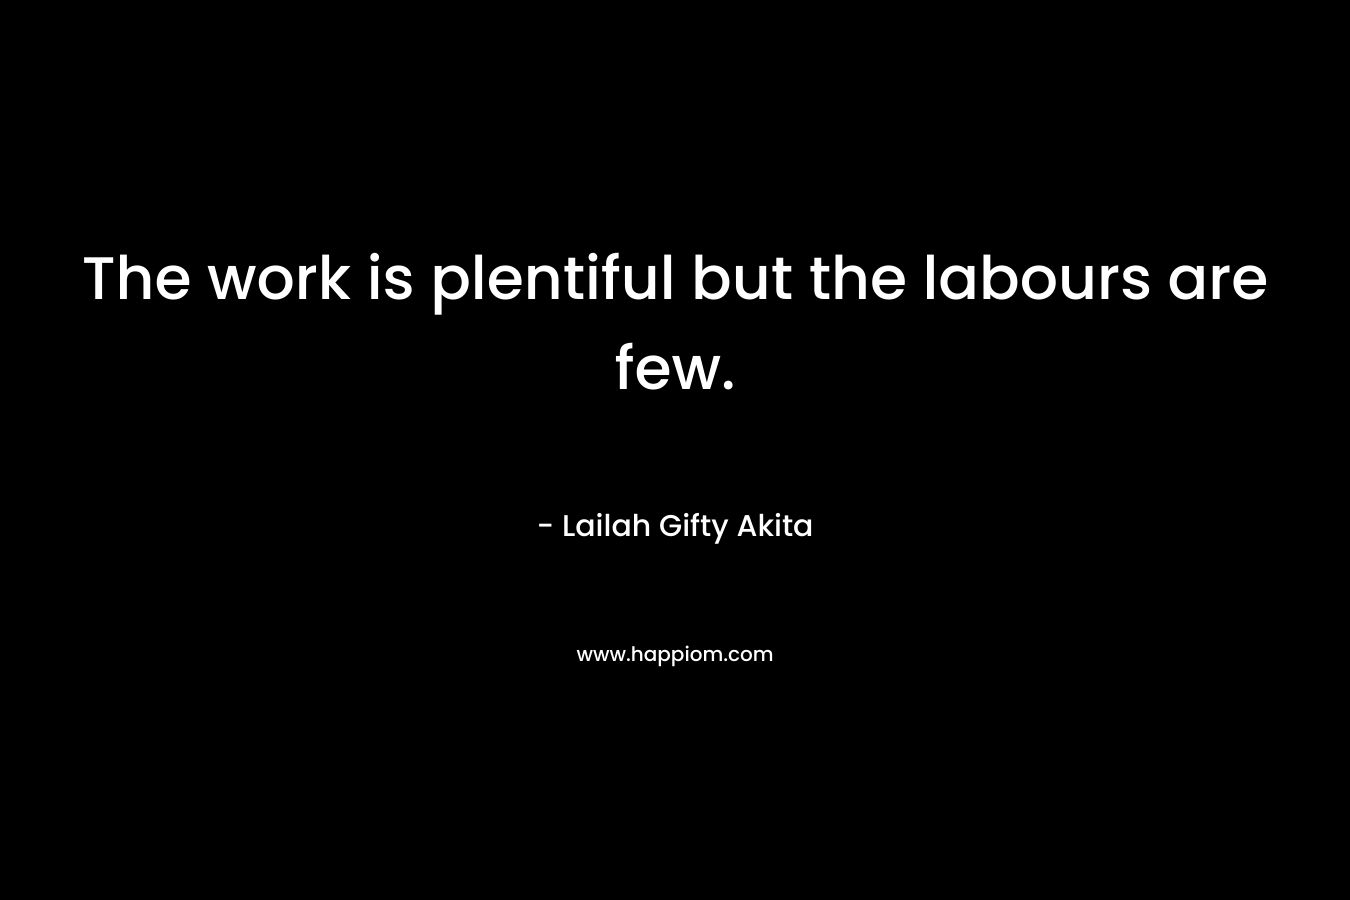 The work is plentiful but the labours are few. – Lailah Gifty Akita